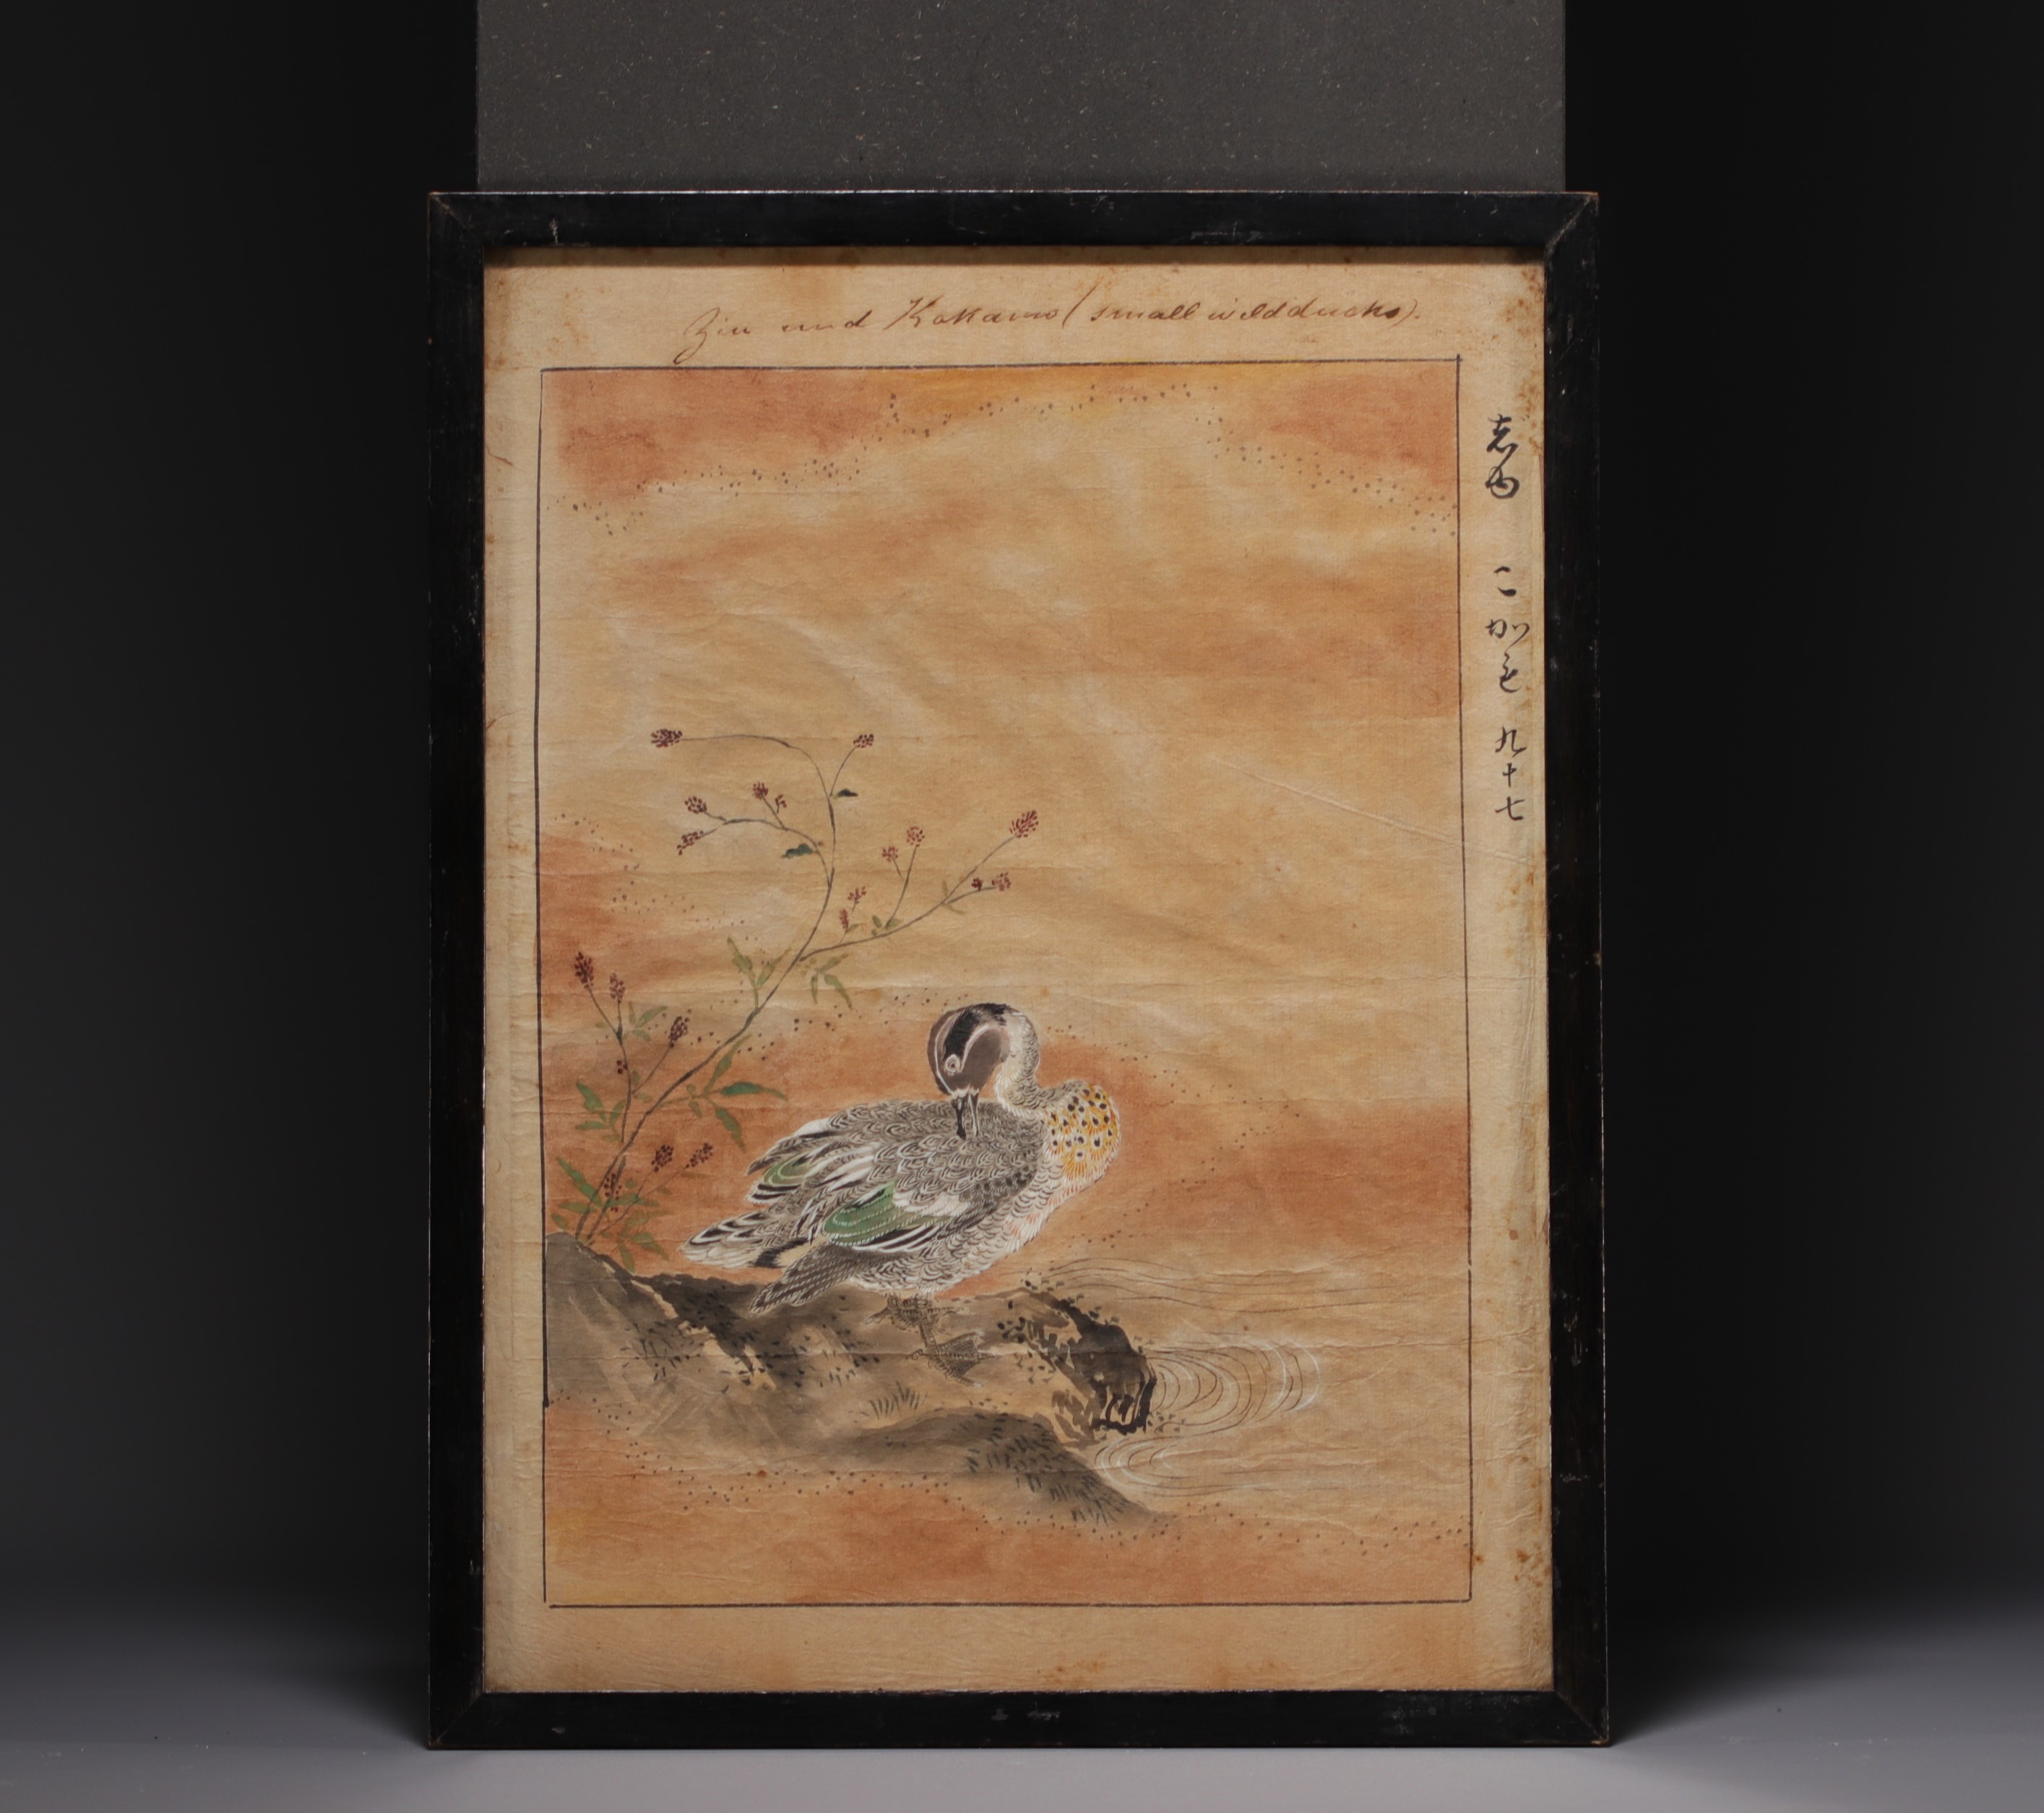 Japan - Print with wild duck and calligraphy, 19th century. - Image 2 of 2